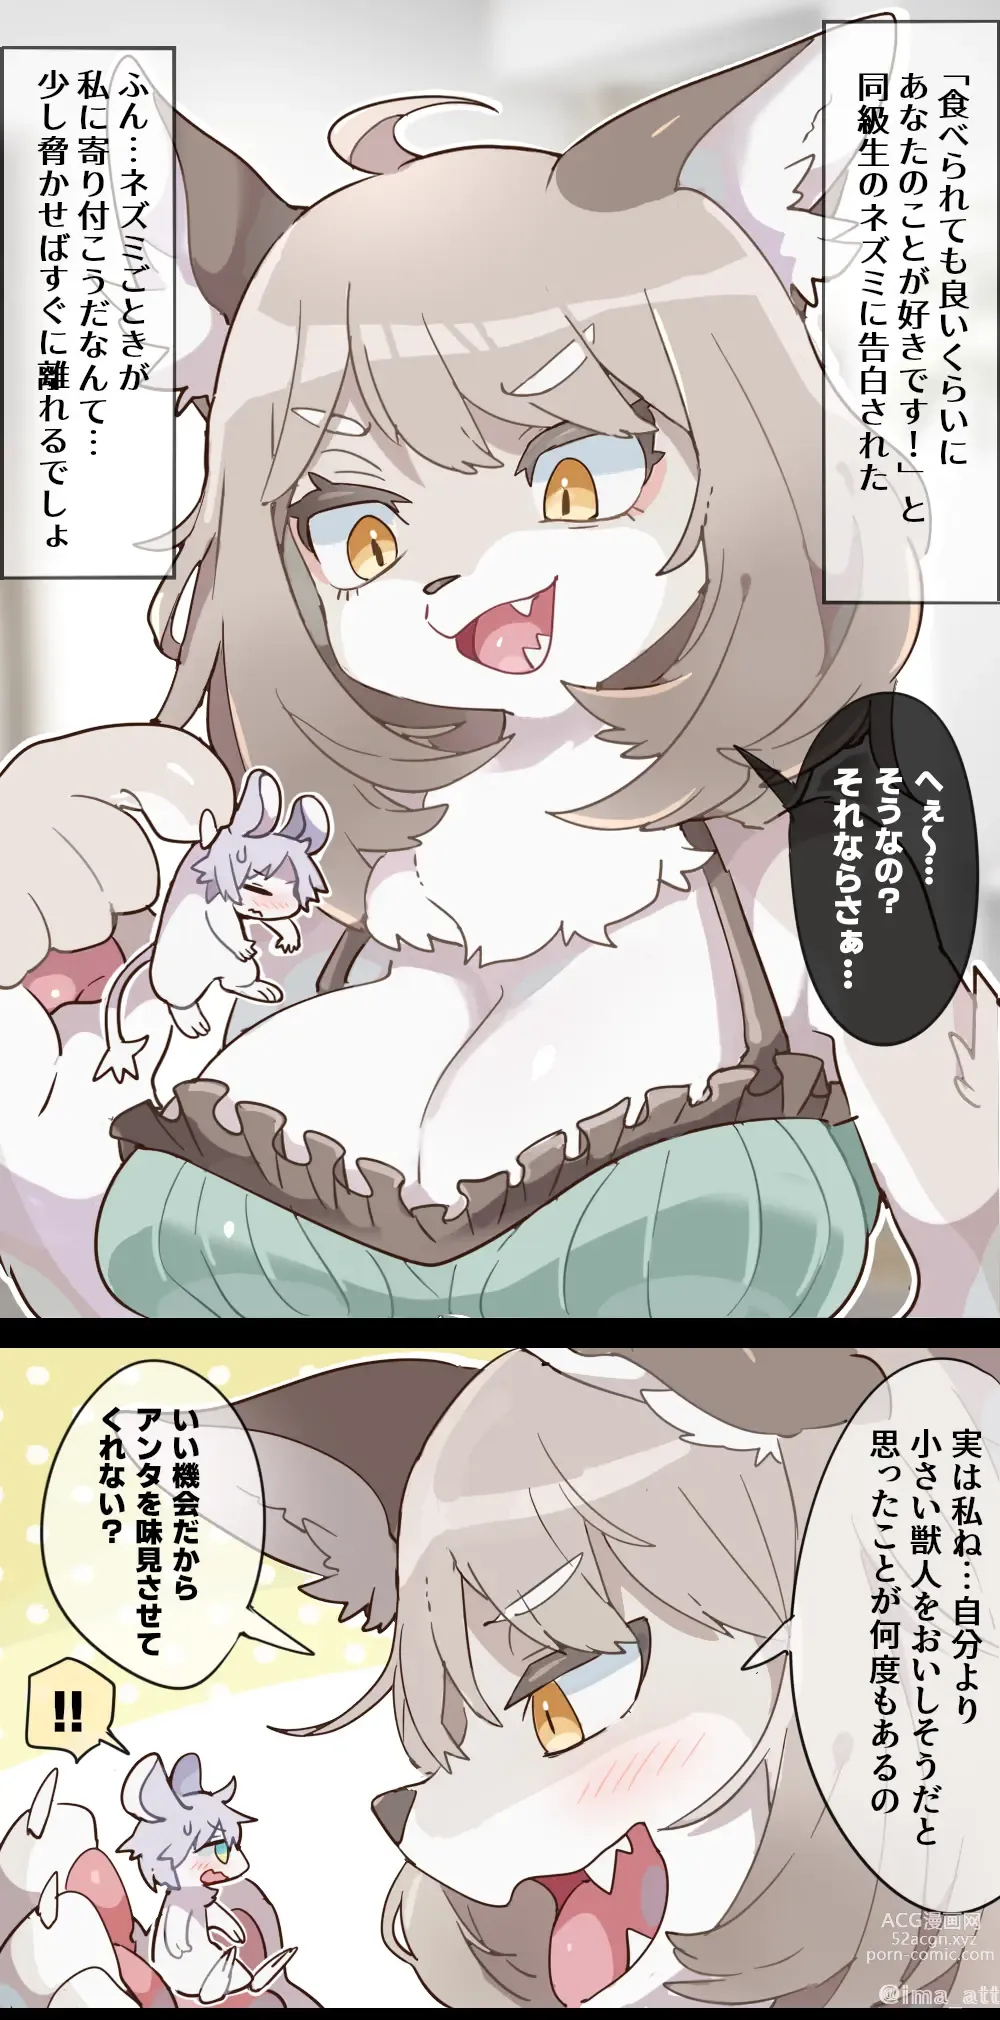 Page 6 of doujinshi Furry Woman VORE